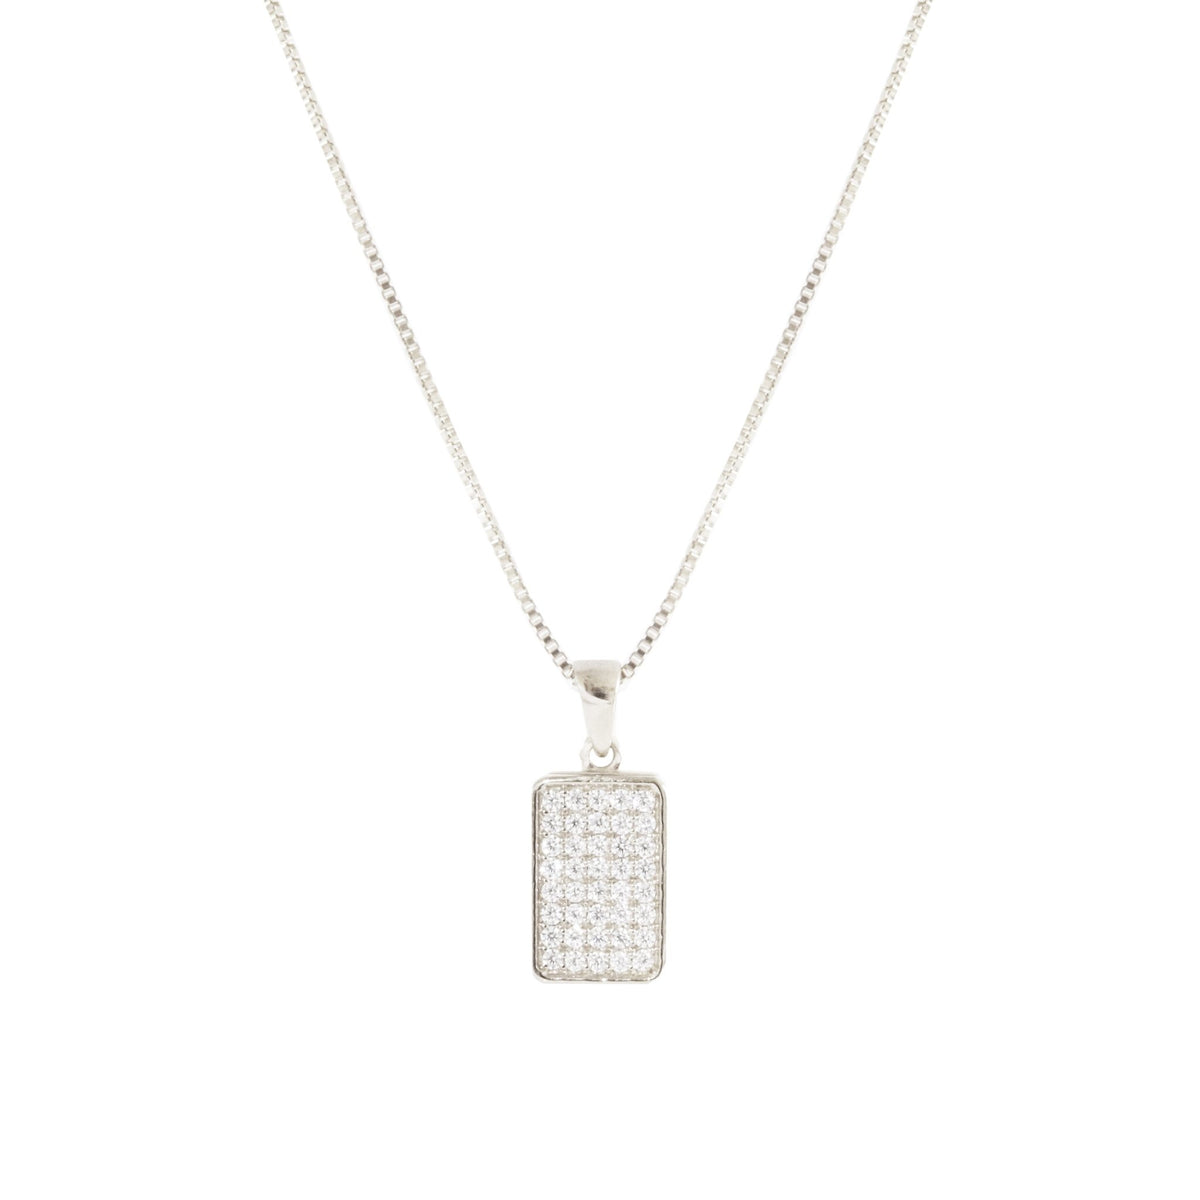 LOVE DAINTY DOG TAG NECKLACE SILVER - SO PRETTY CARA COTTER